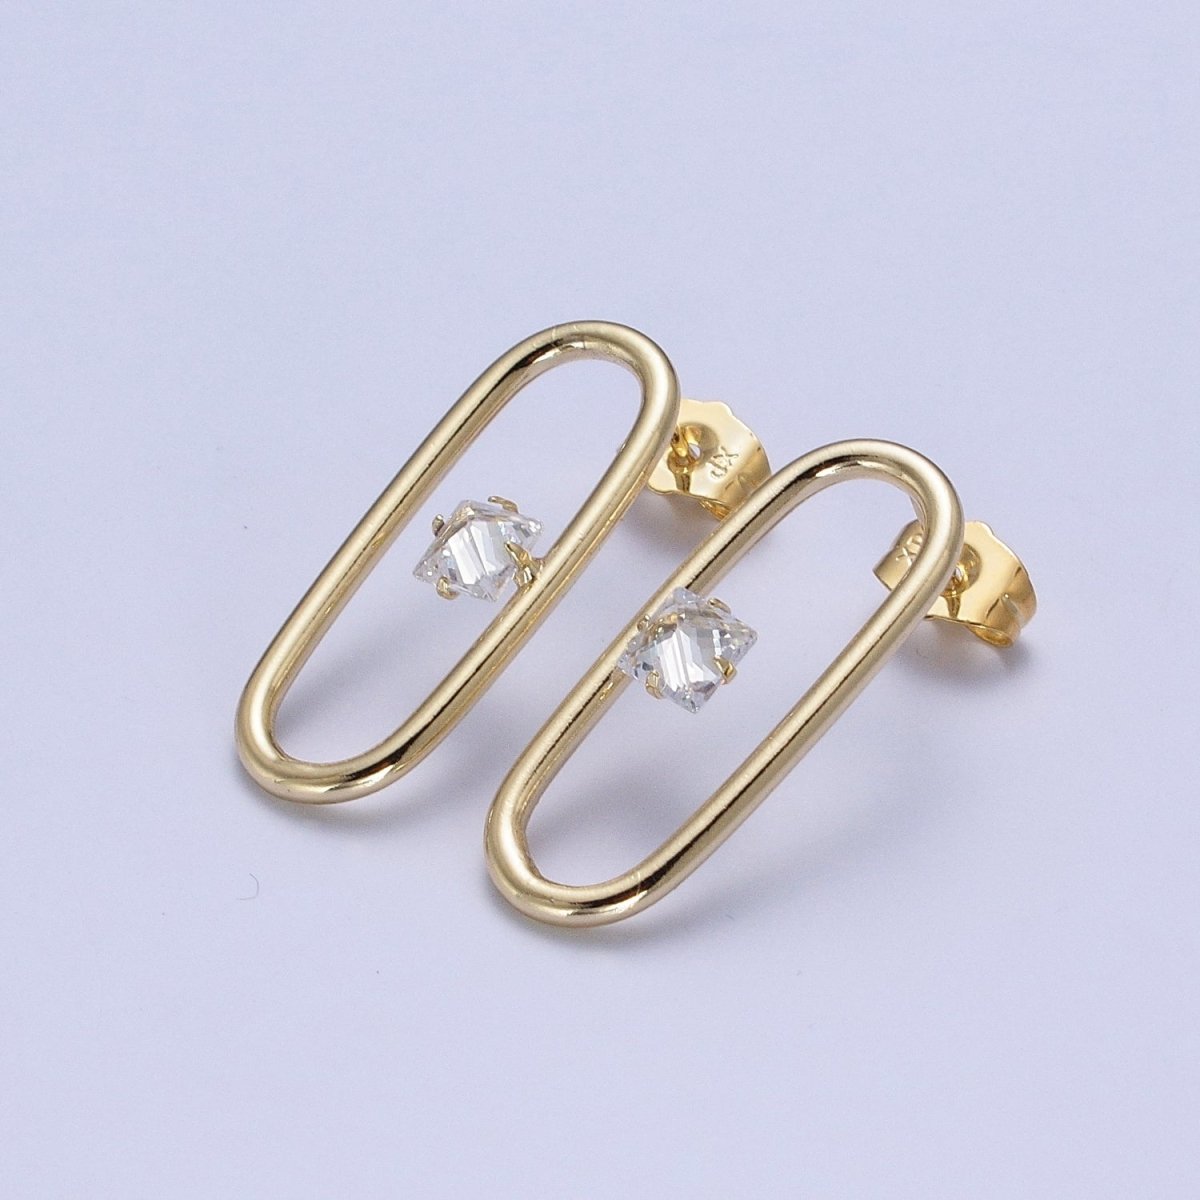 14K Gold Filled Minimalist Stud Earring Oval with Dainty Cubic Zirconia Crystal, Perfect for Everyday Wear or Gift | X913 - DLUXCA